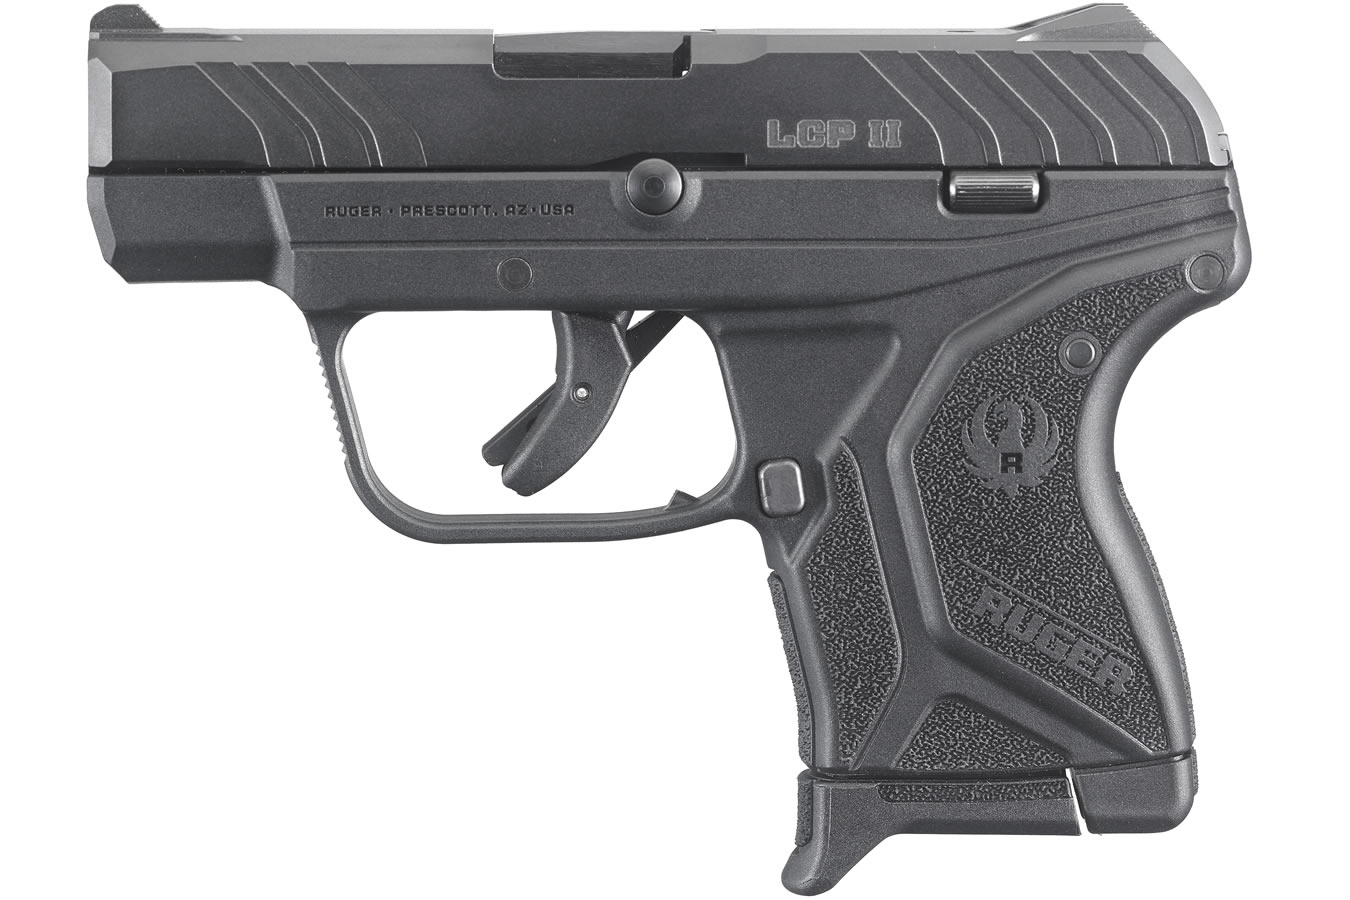 No. 10 Best Selling: RUGER LCP II 380 ACP BLACK